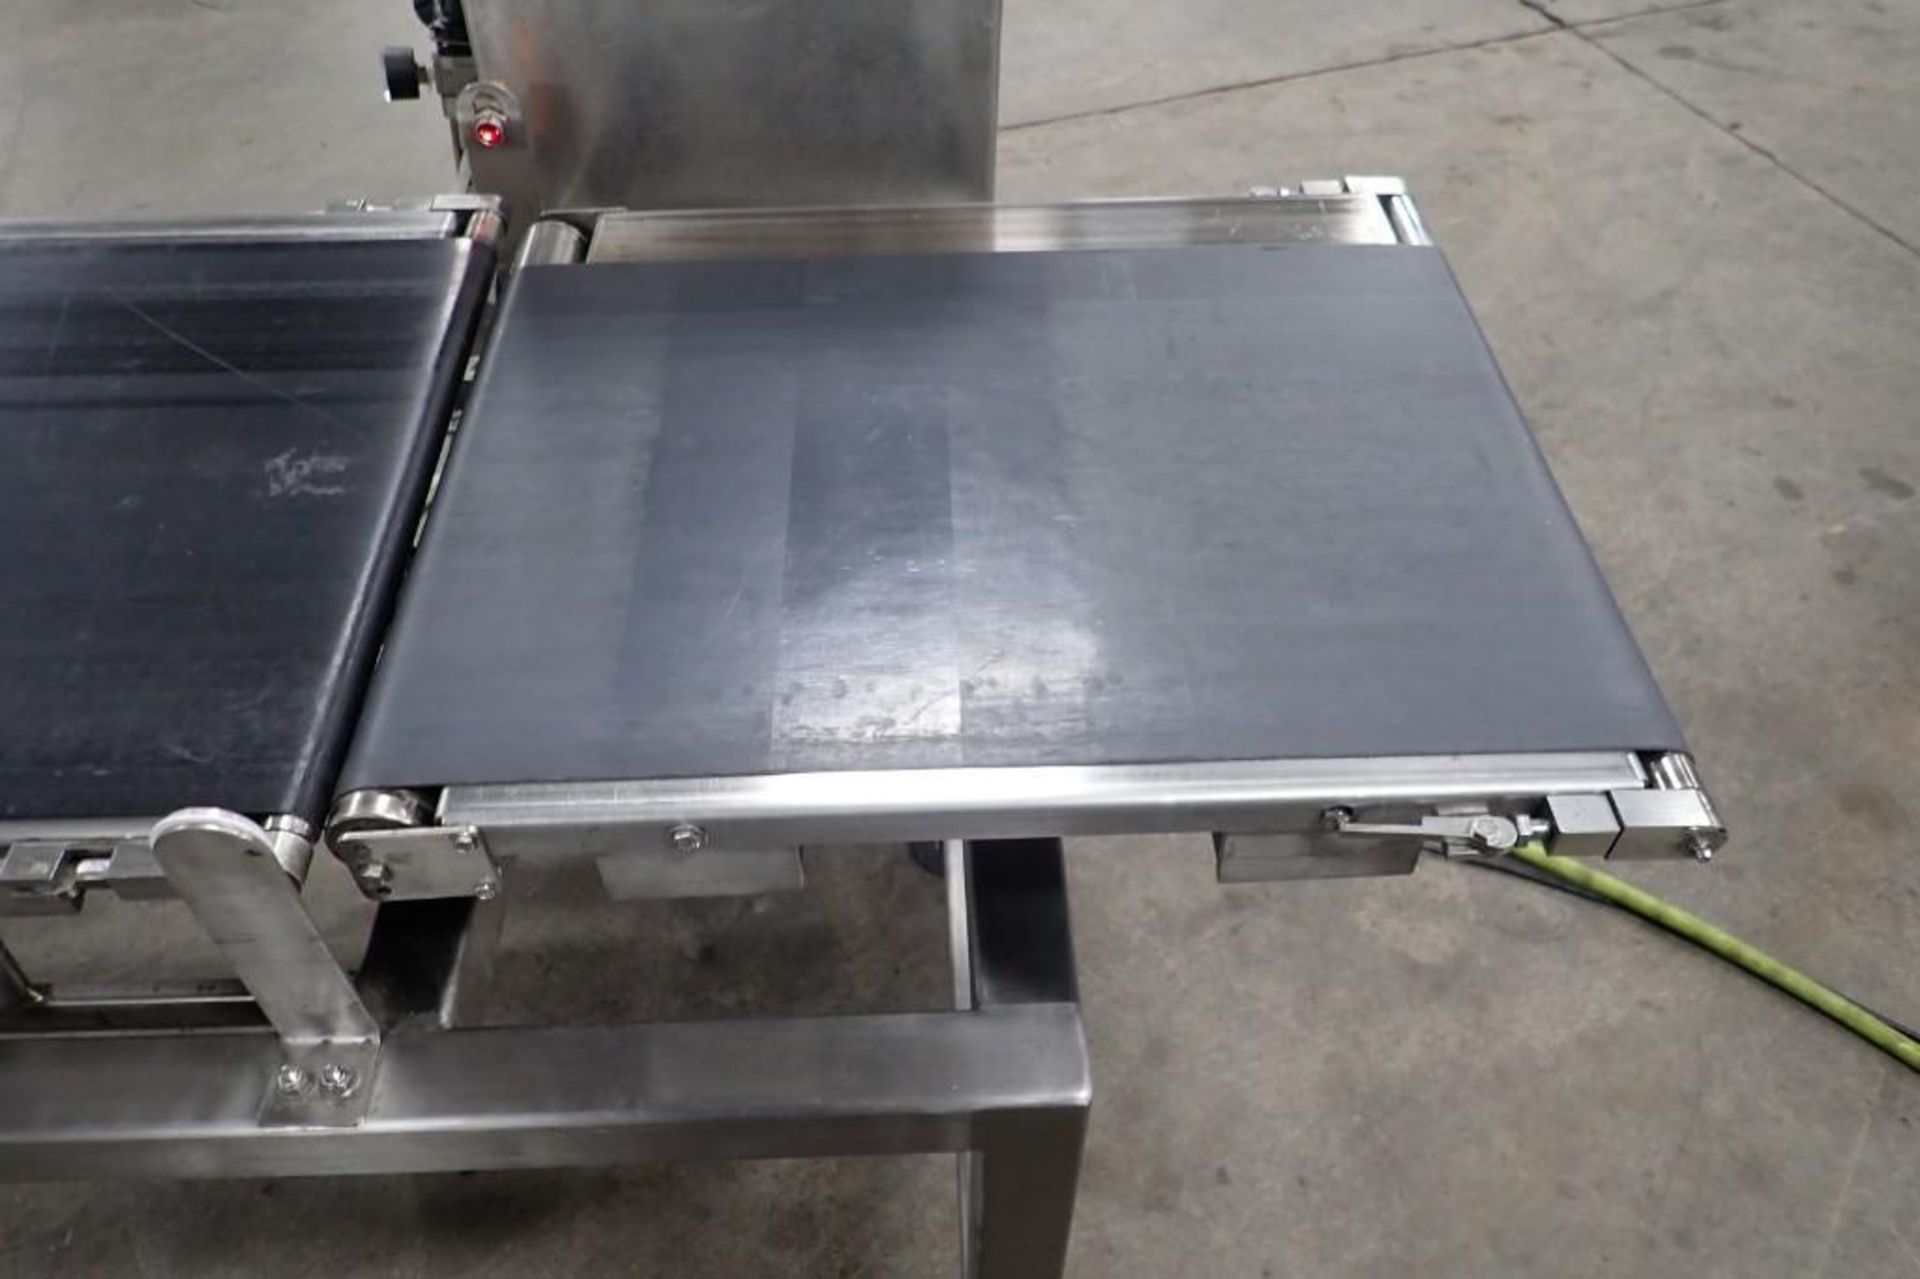 Thompson Scale Company Check Weigher - Image 10 of 37